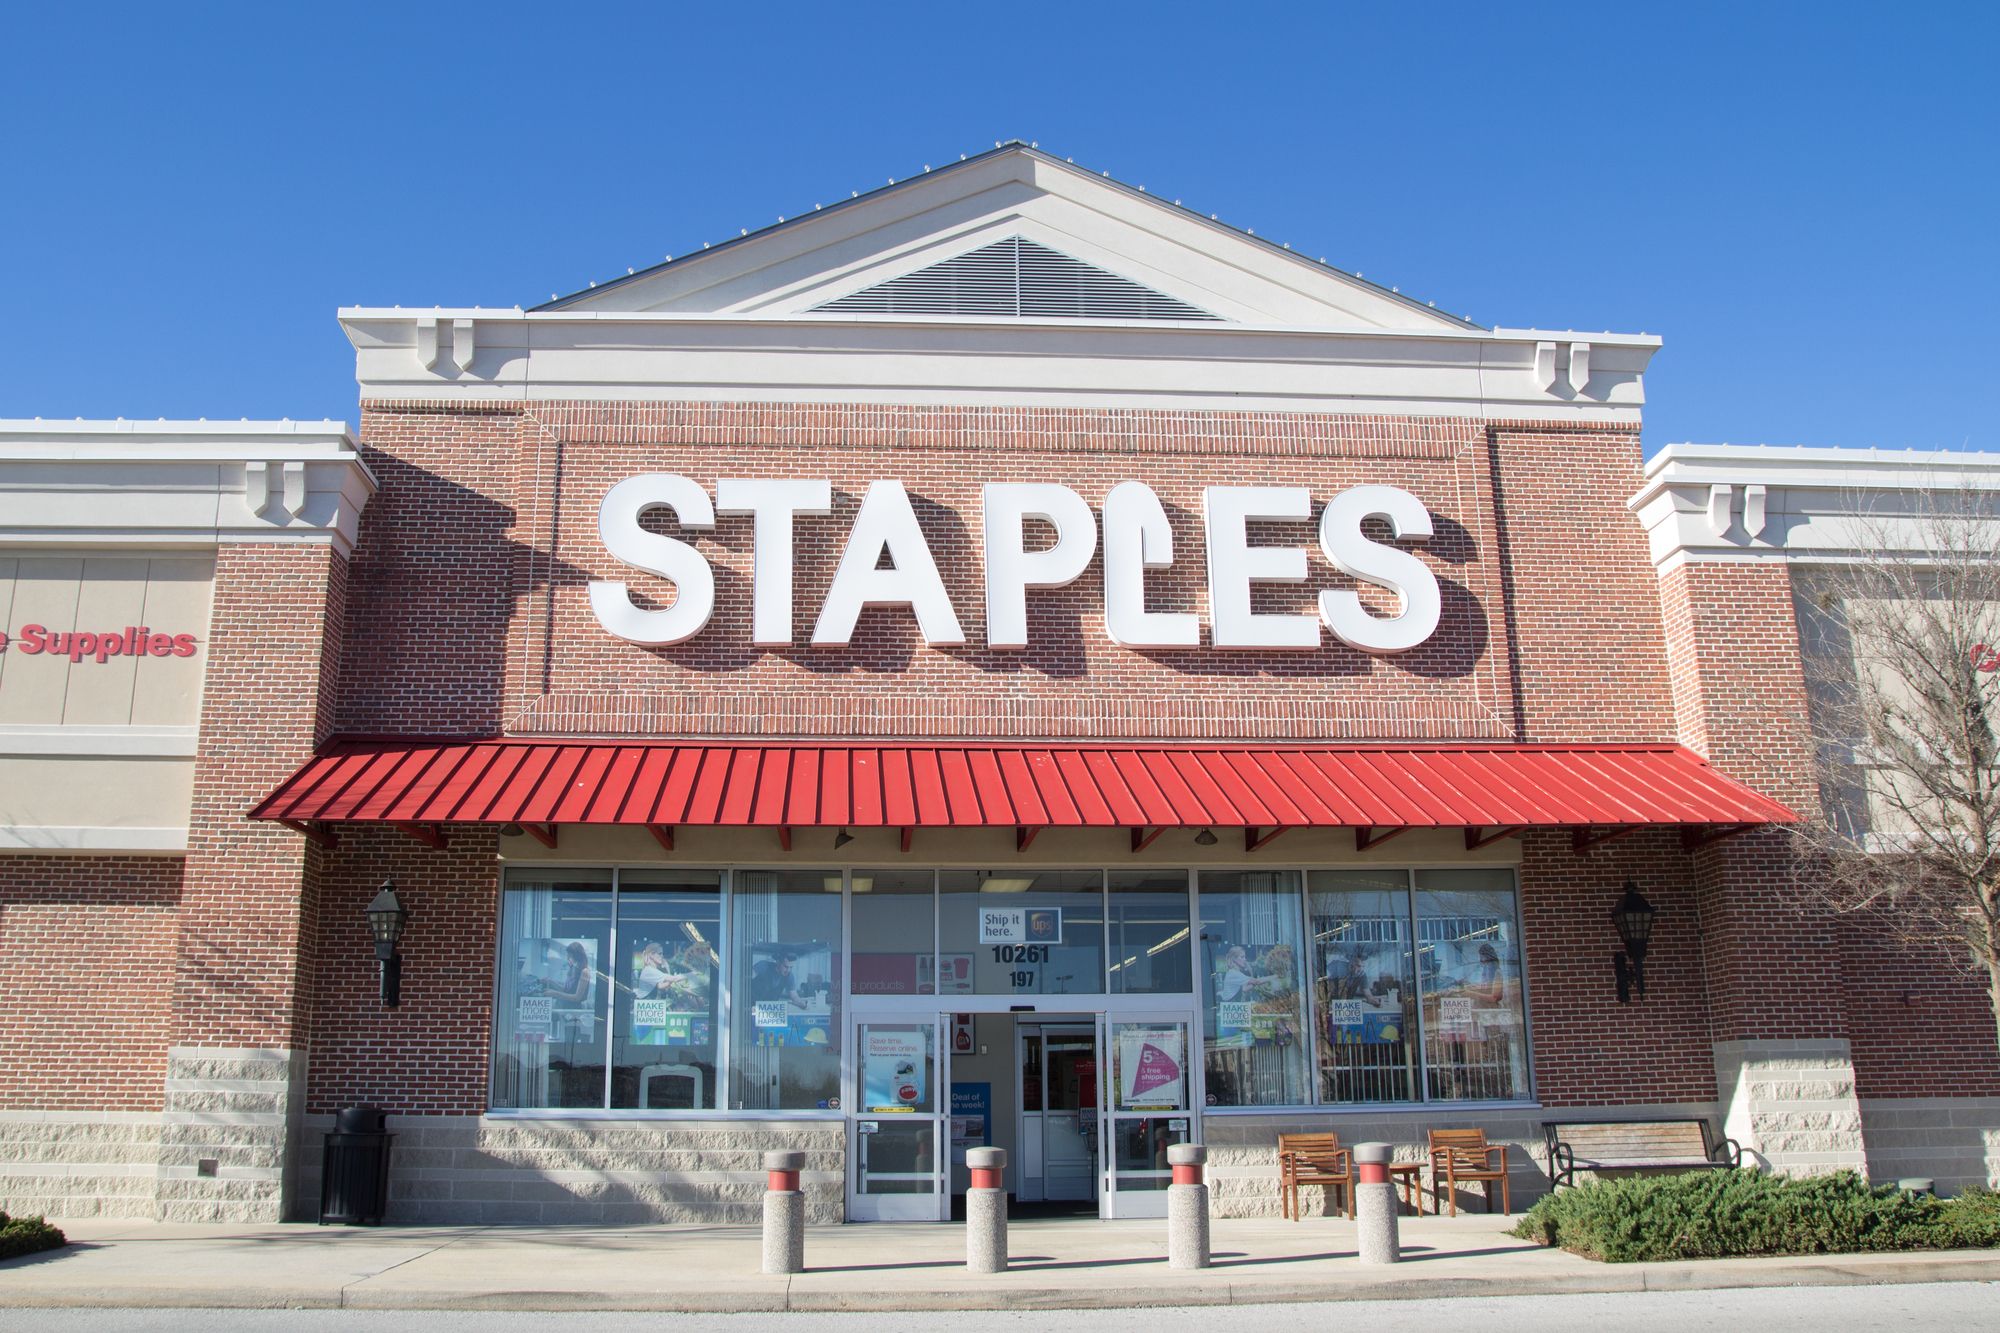 JACKSONVILLE, FLORIDA - MARCH 8, 2014: A Staples retail store in Jacksonville. Staples is an American office supply company, founded in 1986, with over 2,000 store in 26 countries.